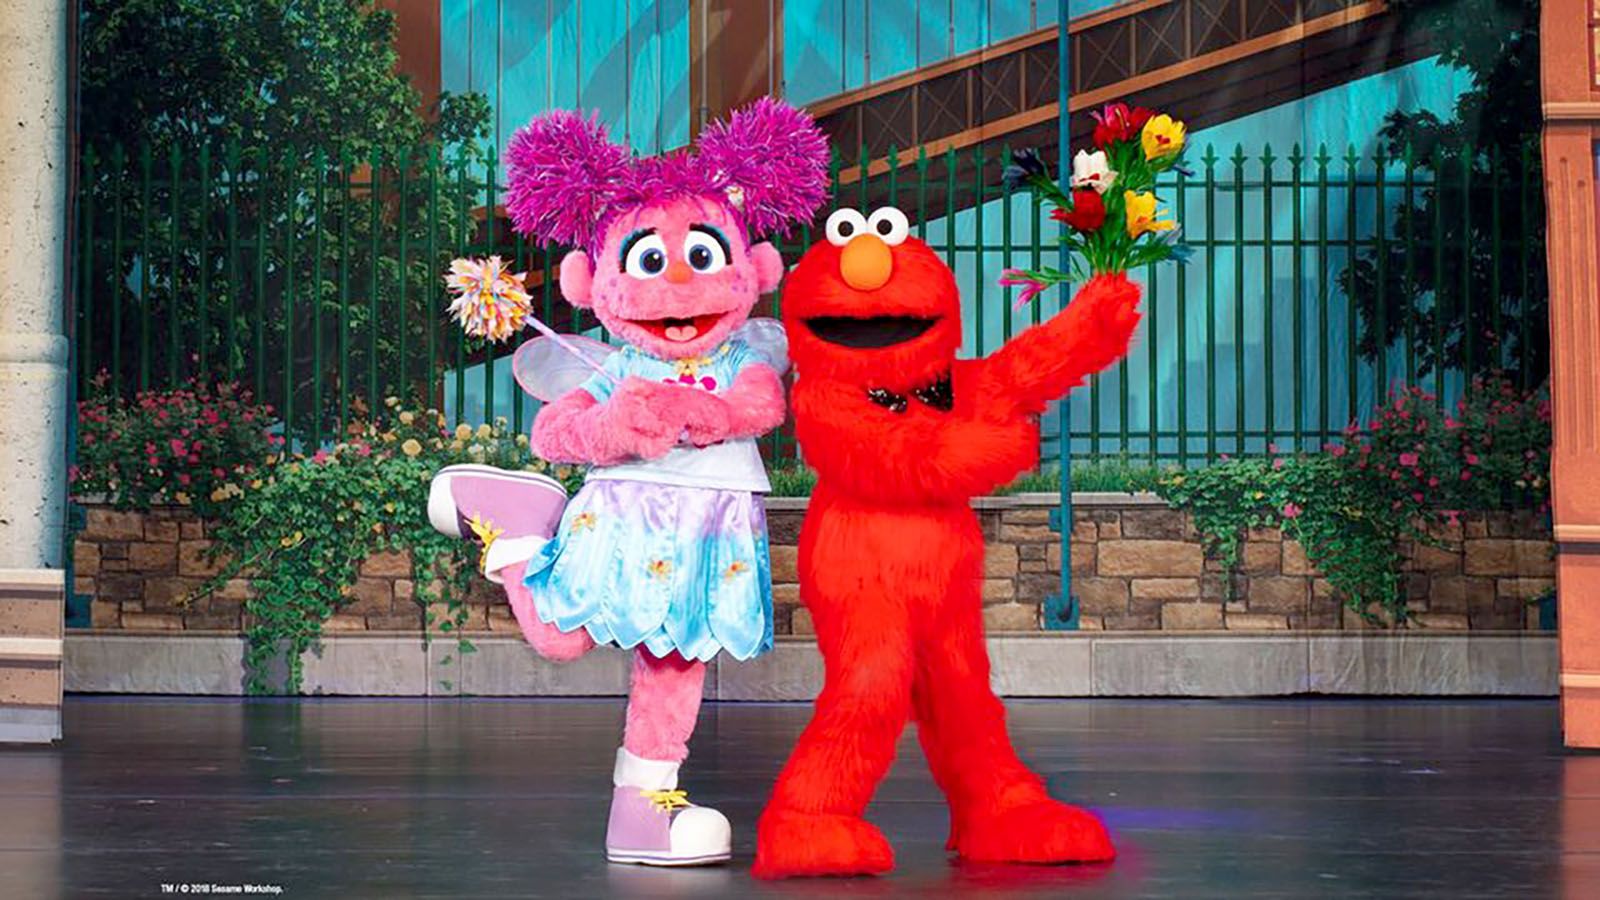 You'll have three chances to catch "Sesame Street Live!" at the Coliseum on Oct. 15.